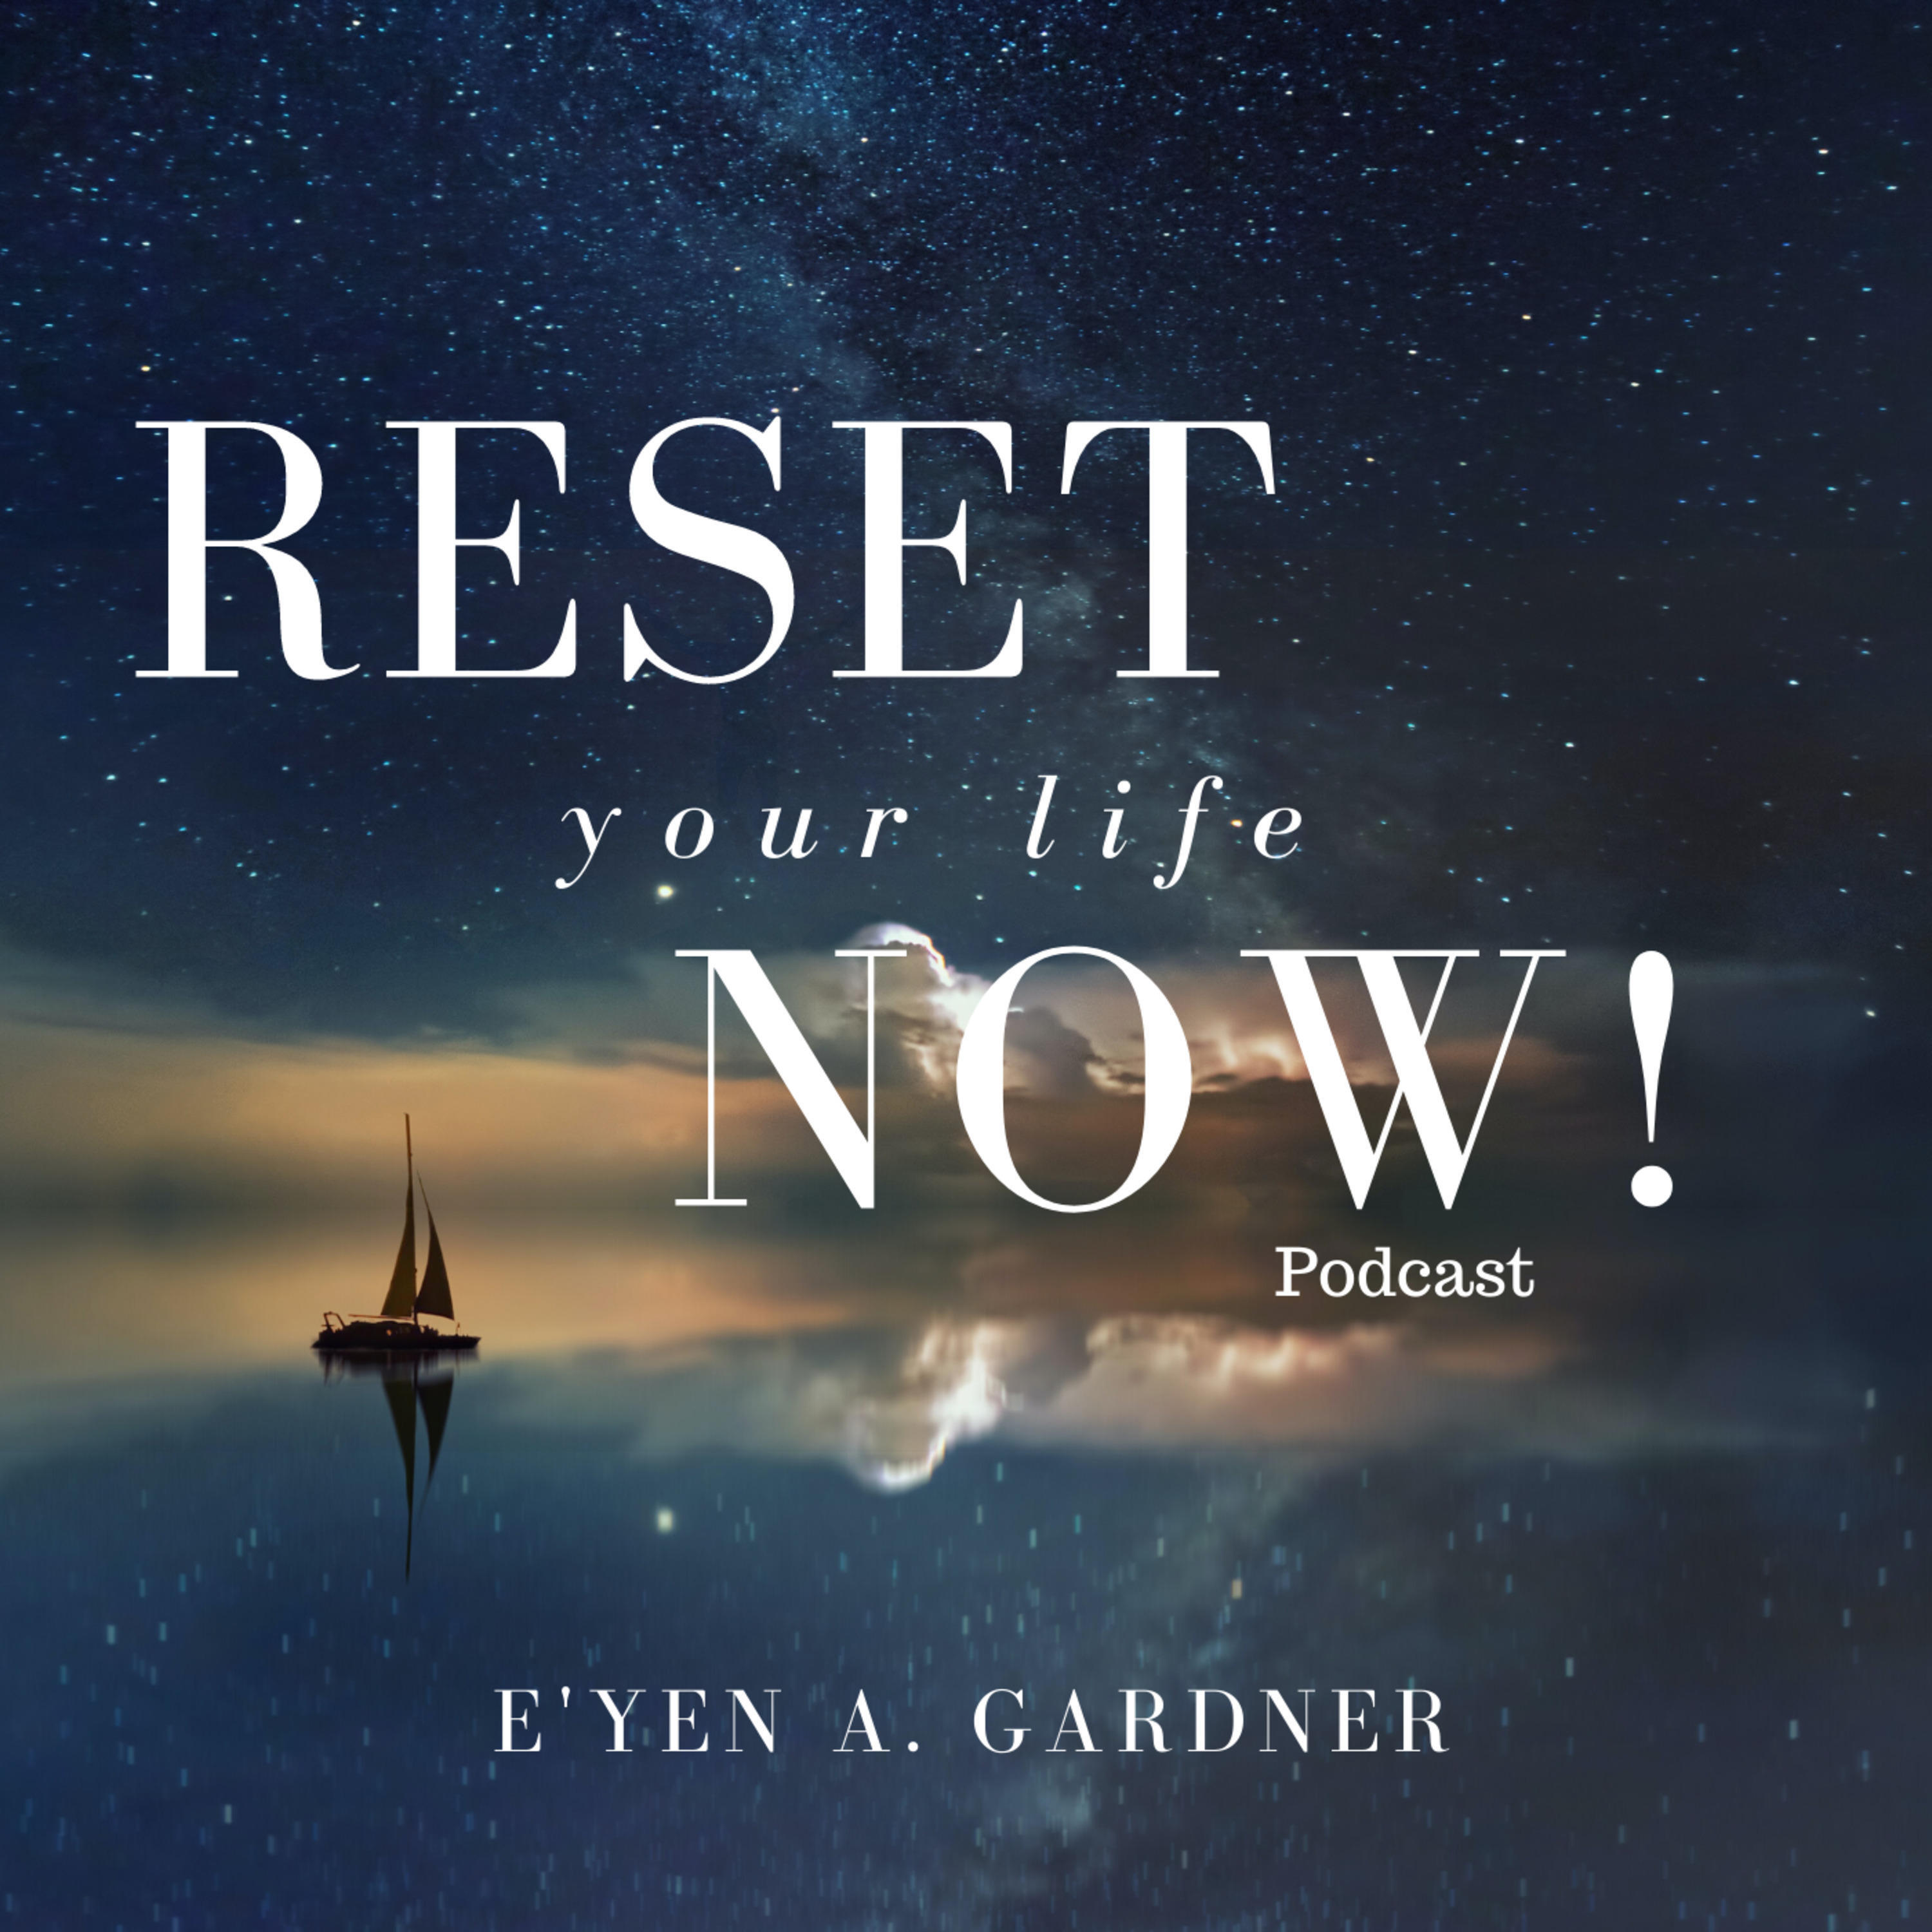 You are my life now. Discovery Now Podcast. Reset Dream. Life is Now. This your Life.